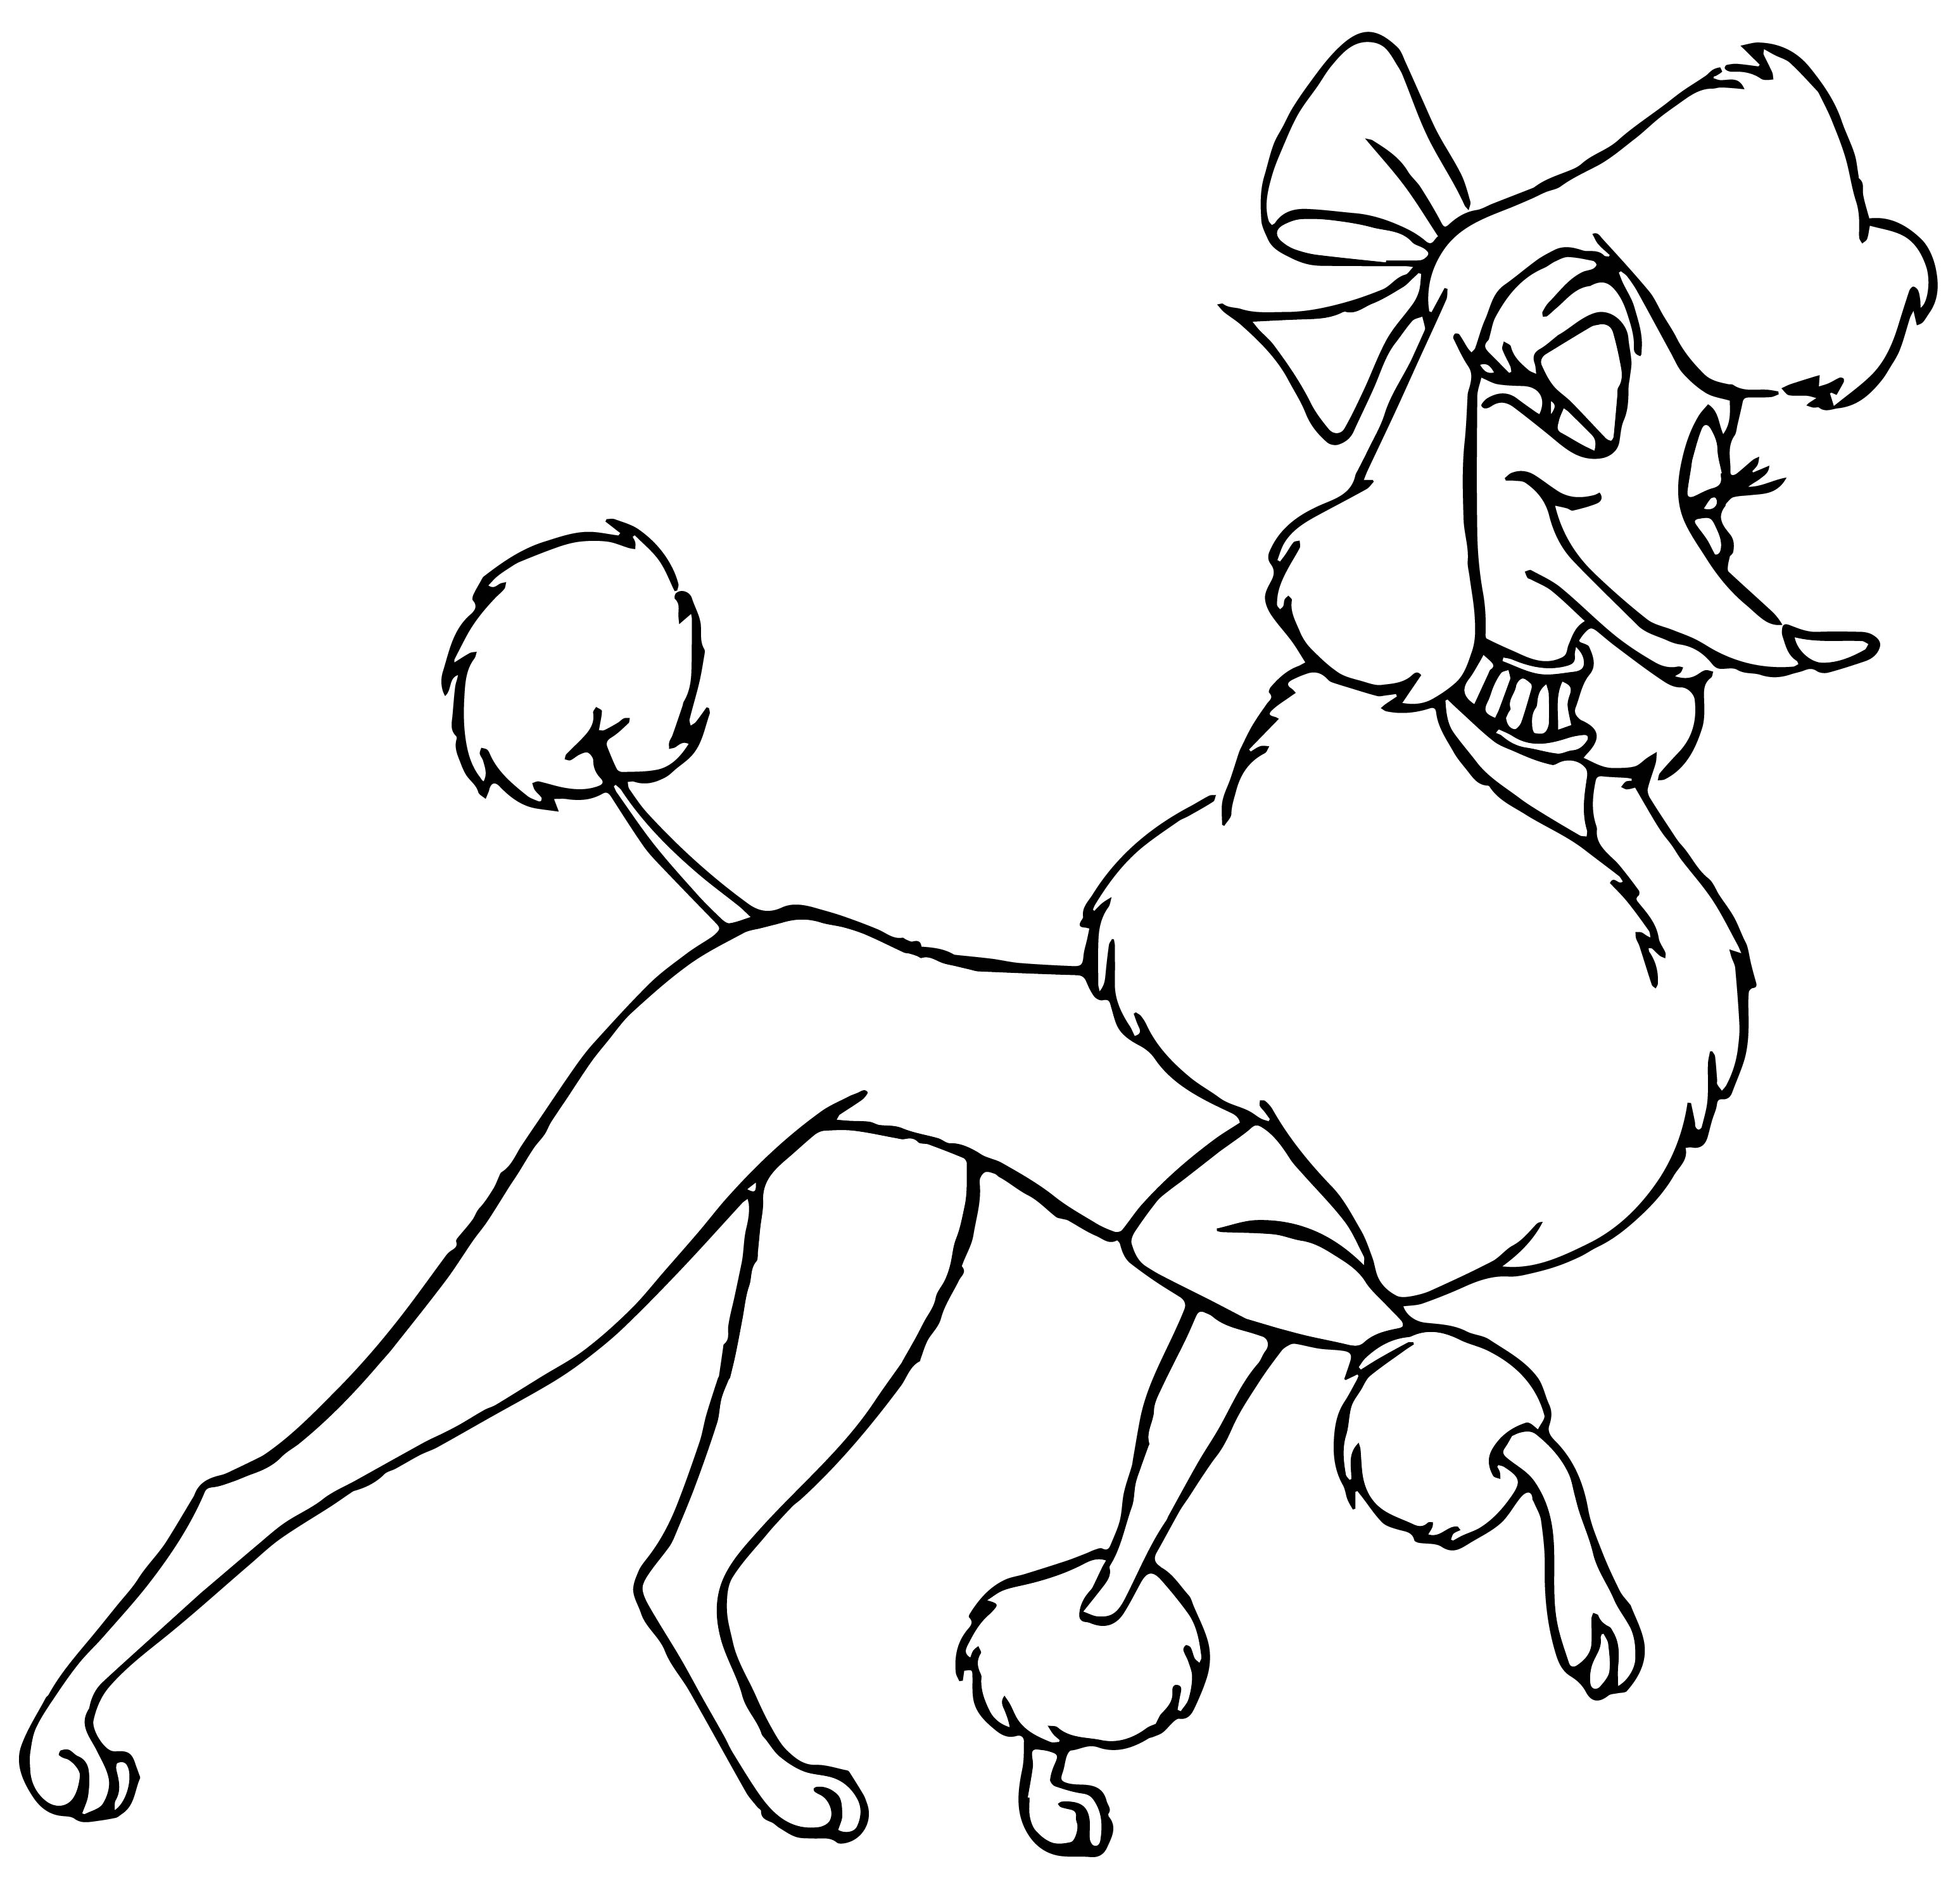 Glorious poodle coloring pages for kids